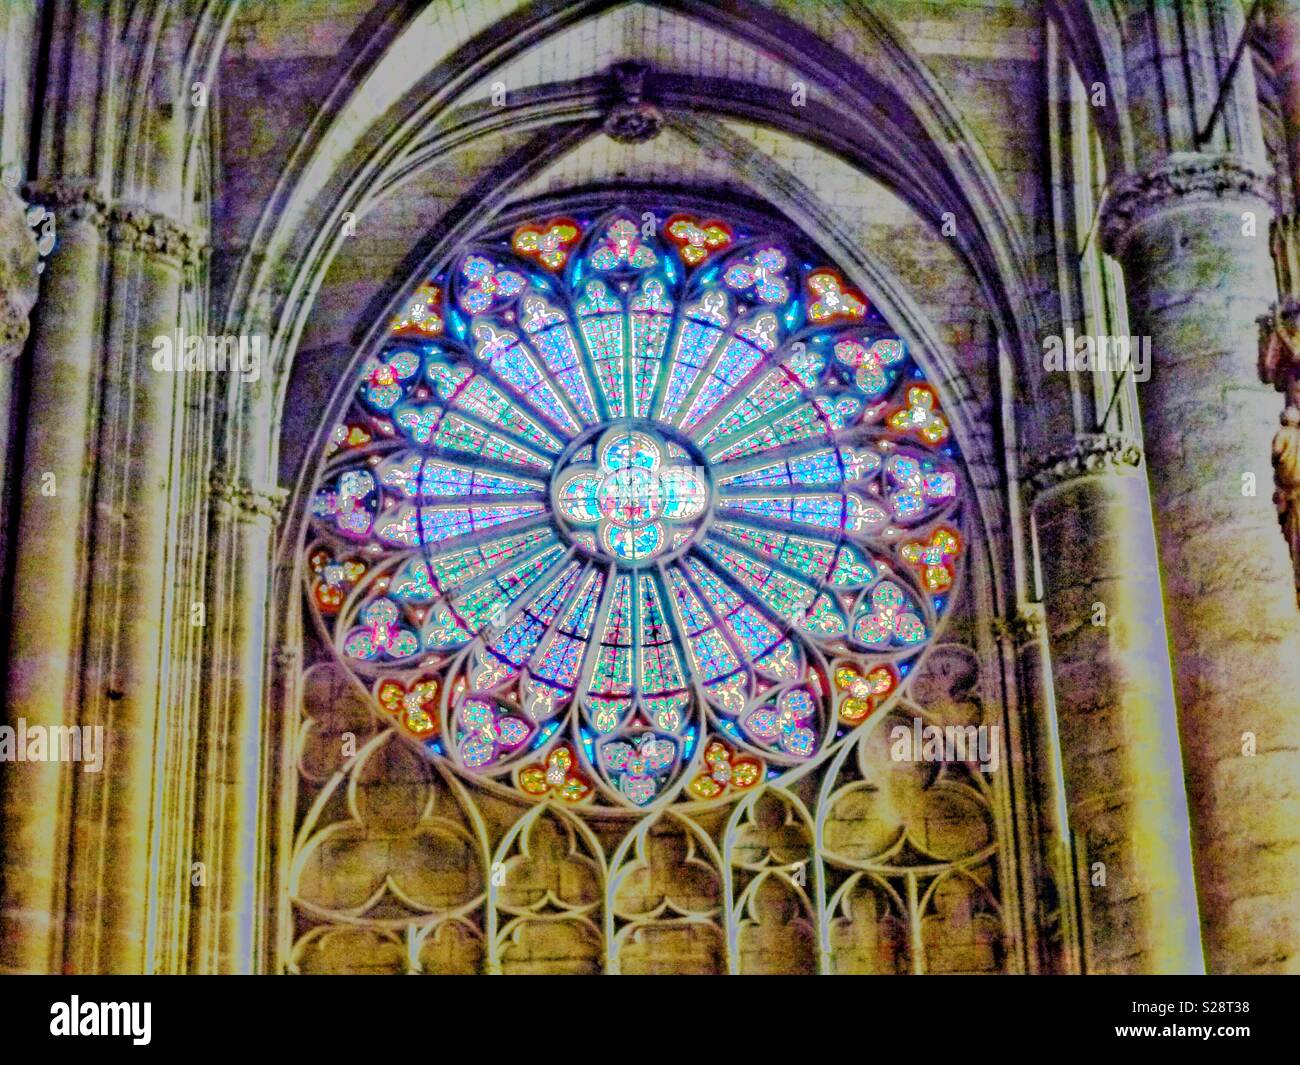 Rose Window in Basilica Saint Nazarius and Celsius. Gothic Style 12th Century Church in Carcassonne, Languedoc, France. Stock Photo